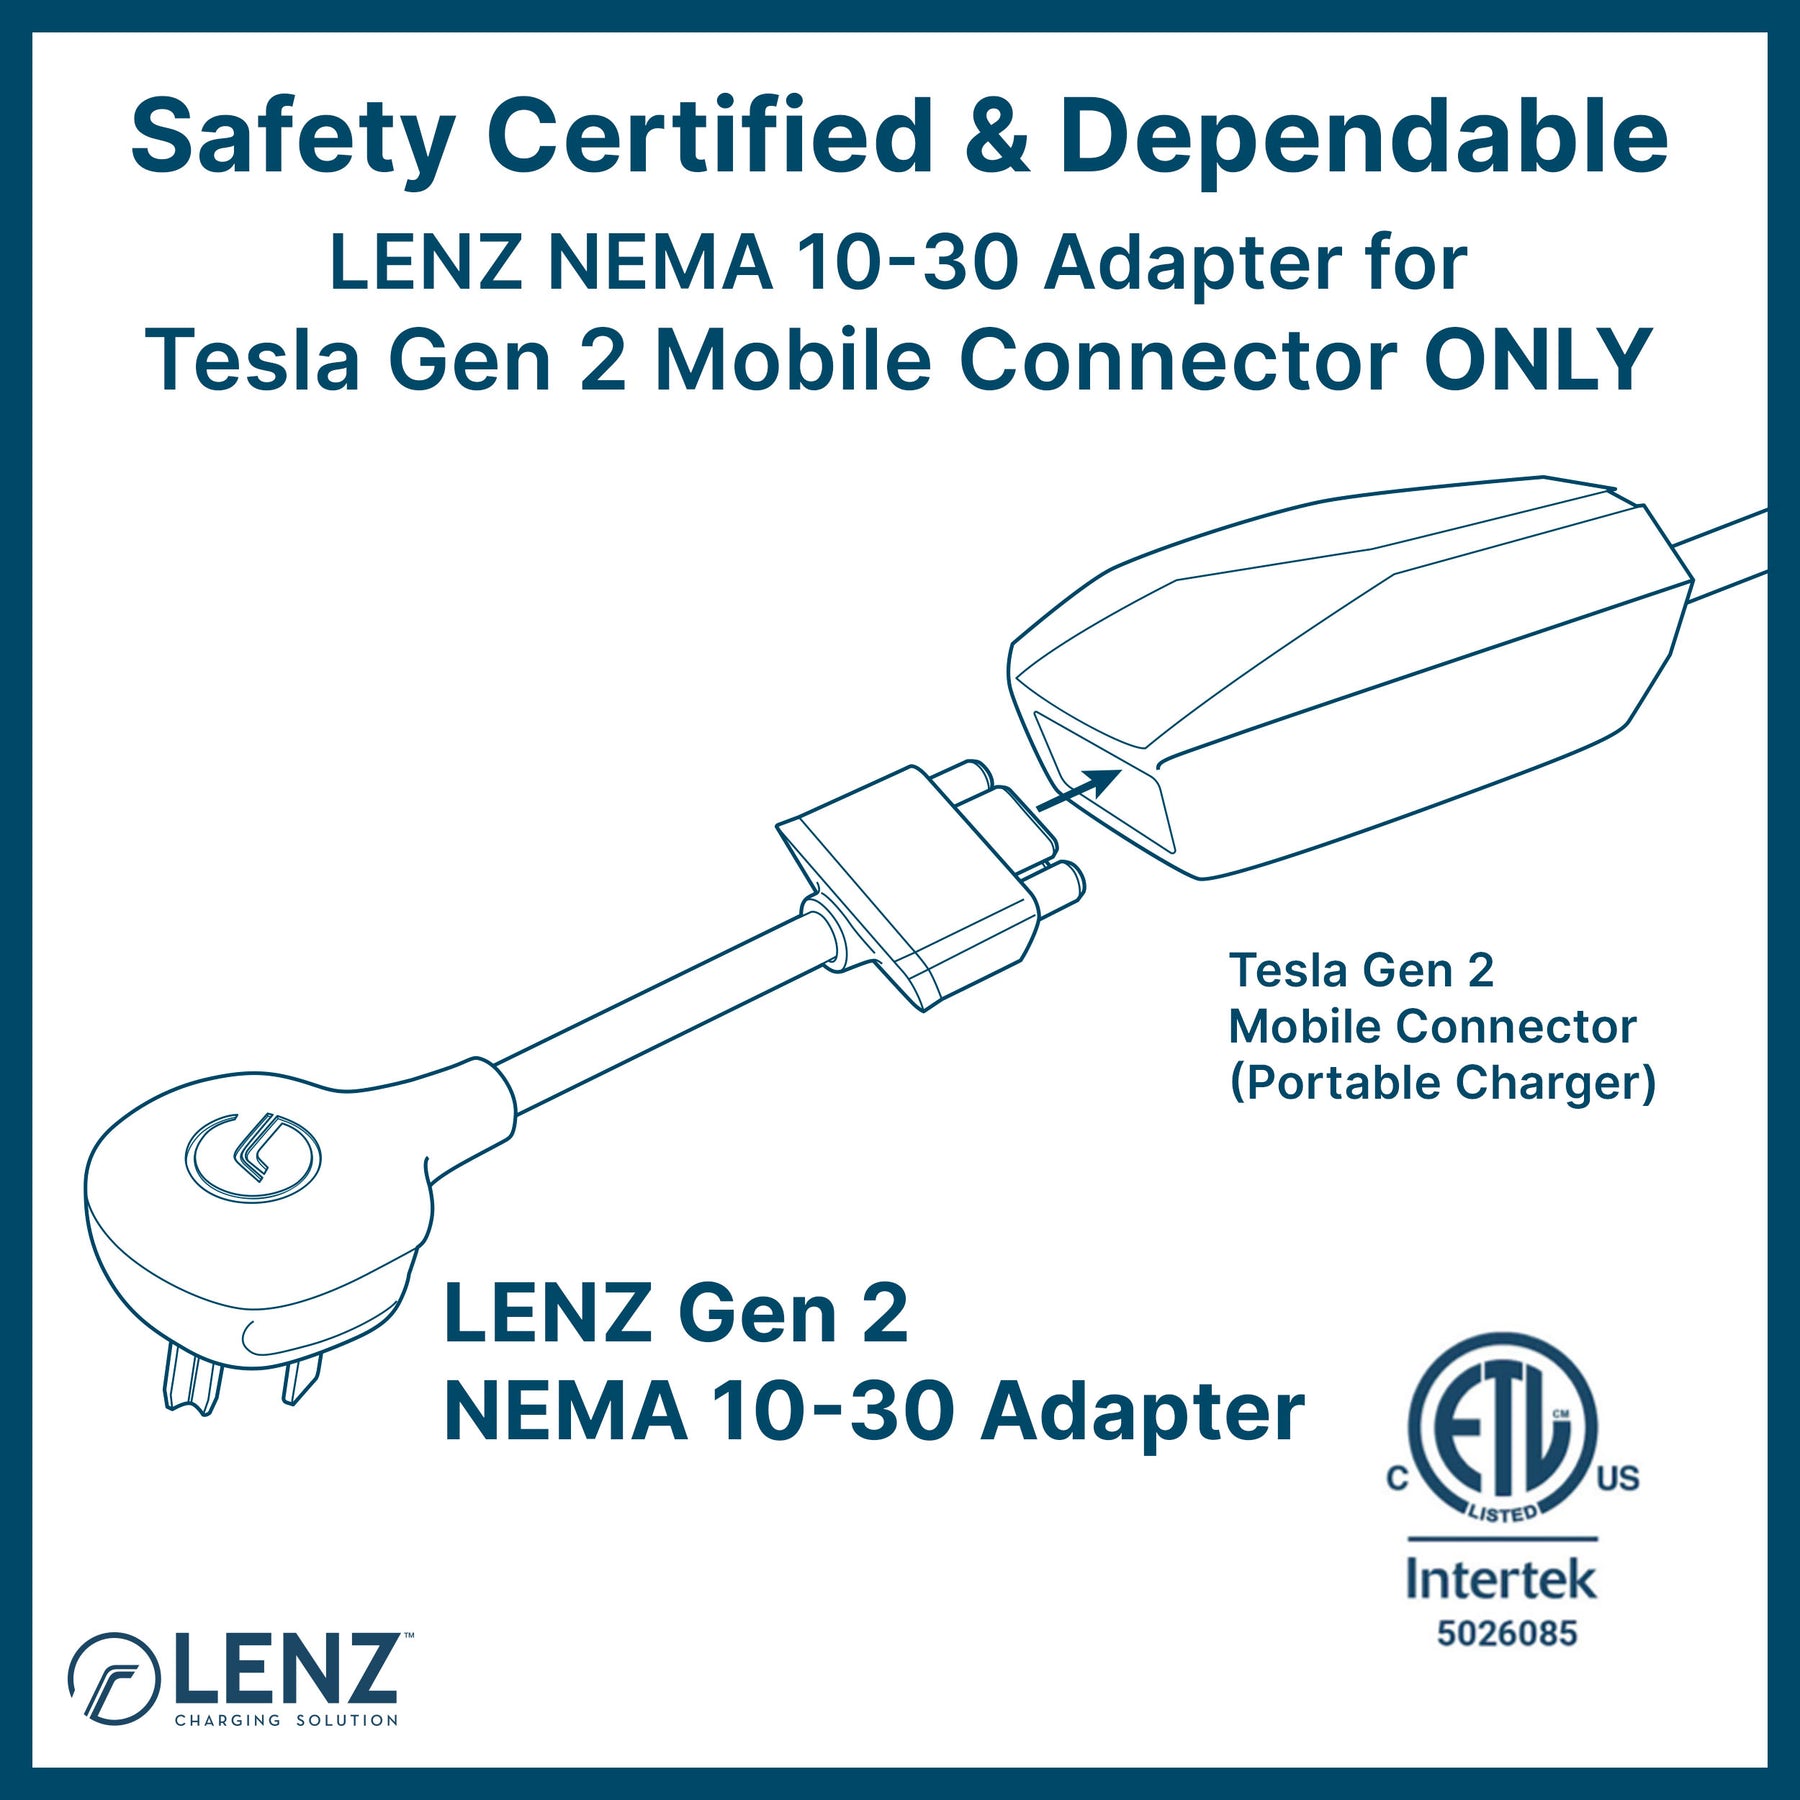 LENZ NEMA10-30 Adapter is safety tested and certified by ETL (Intertek 5026085) and compatible with Tesla Gen 2 Mobile Connector ONLY